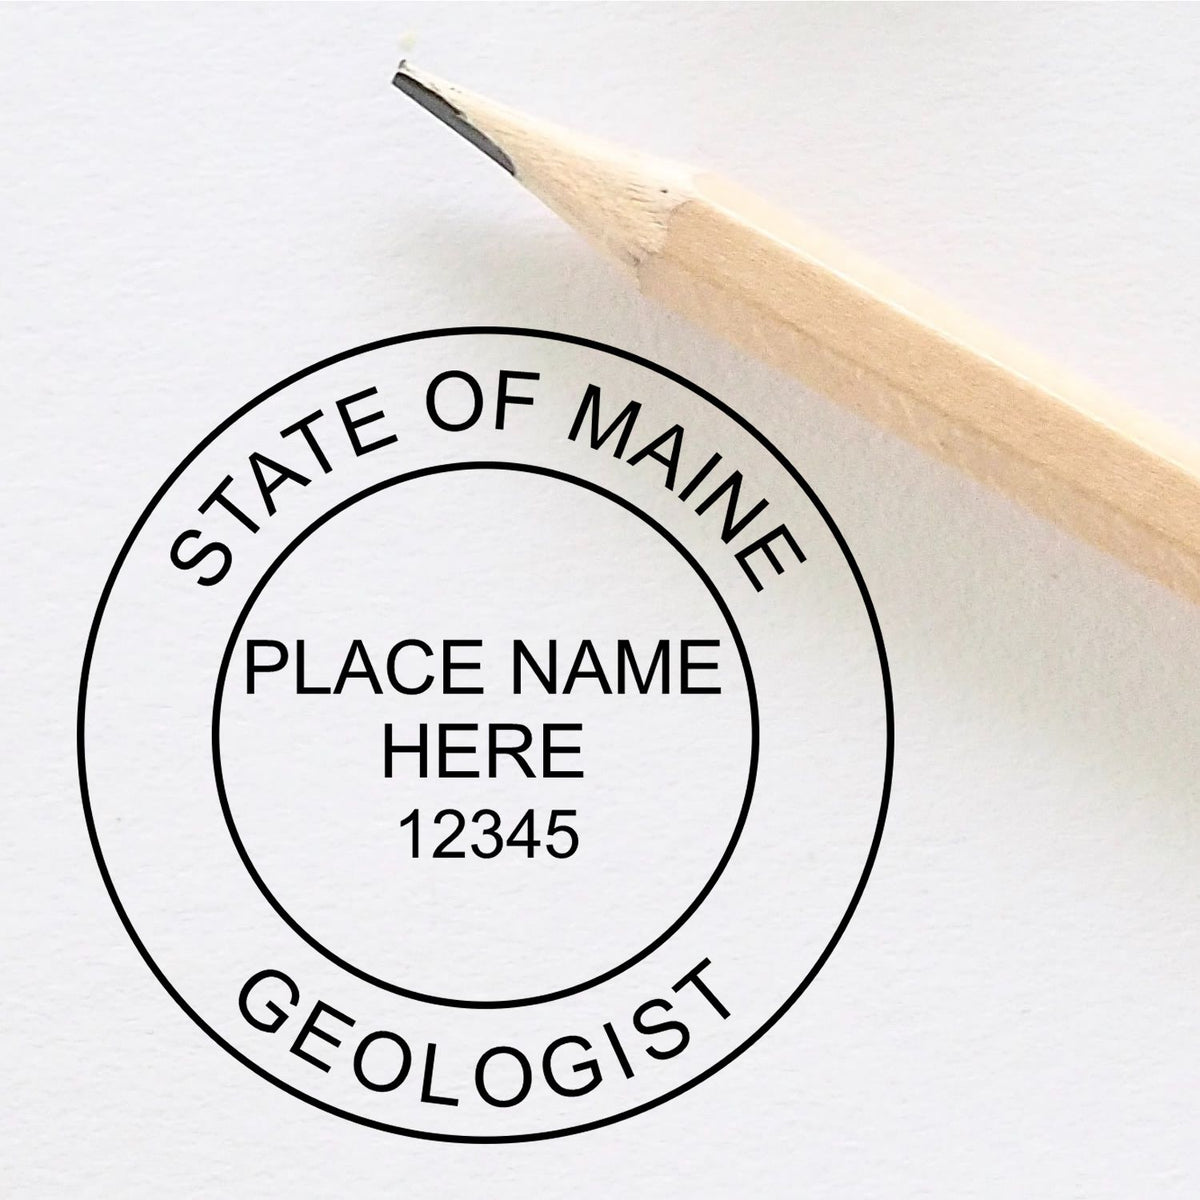 The Maine Professional Geologist Seal Stamp stamp impression comes to life with a crisp, detailed image stamped on paper - showcasing true professional quality.